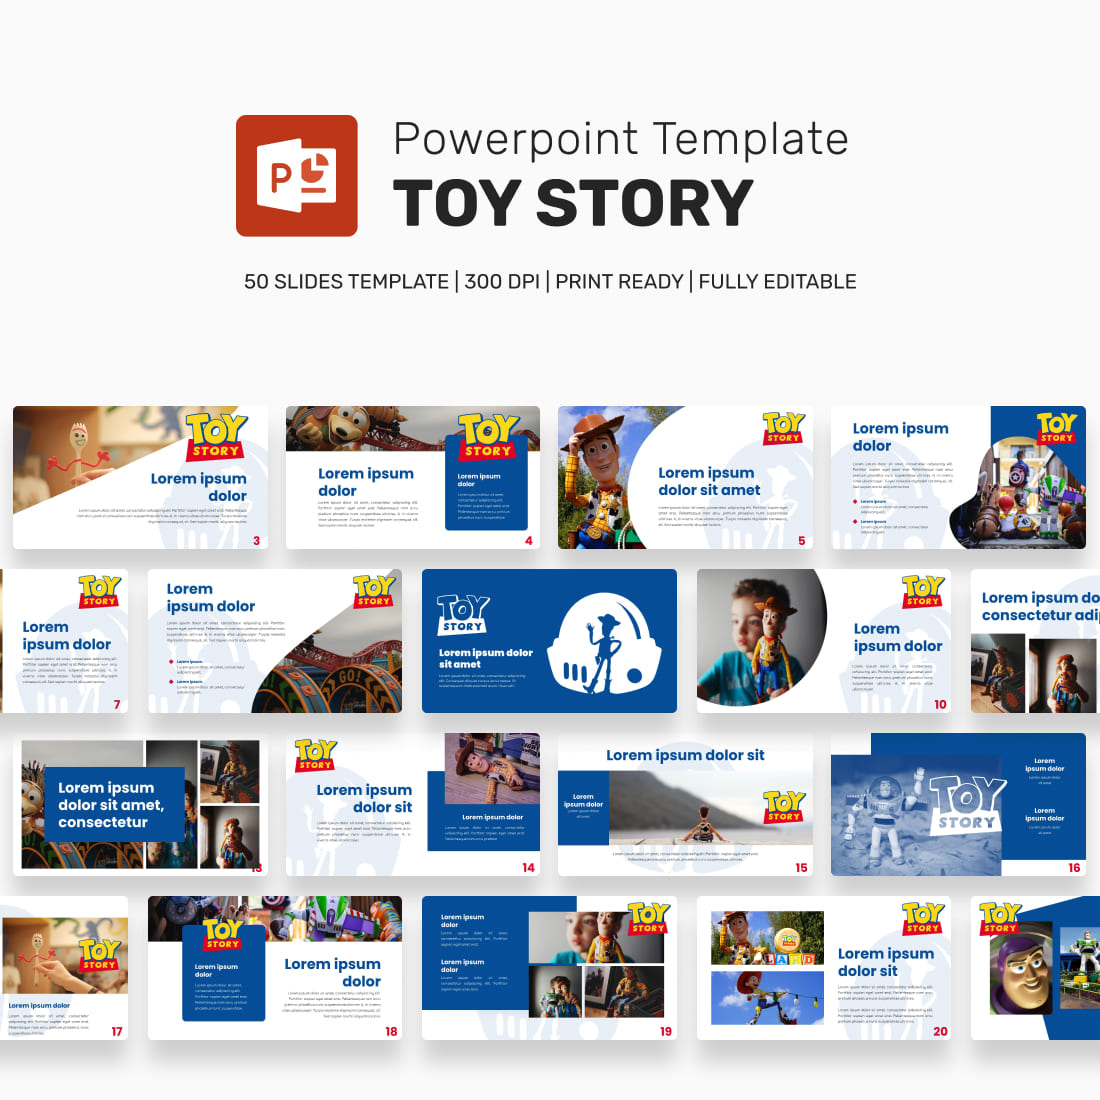 Toystory powerpoint template main cover.